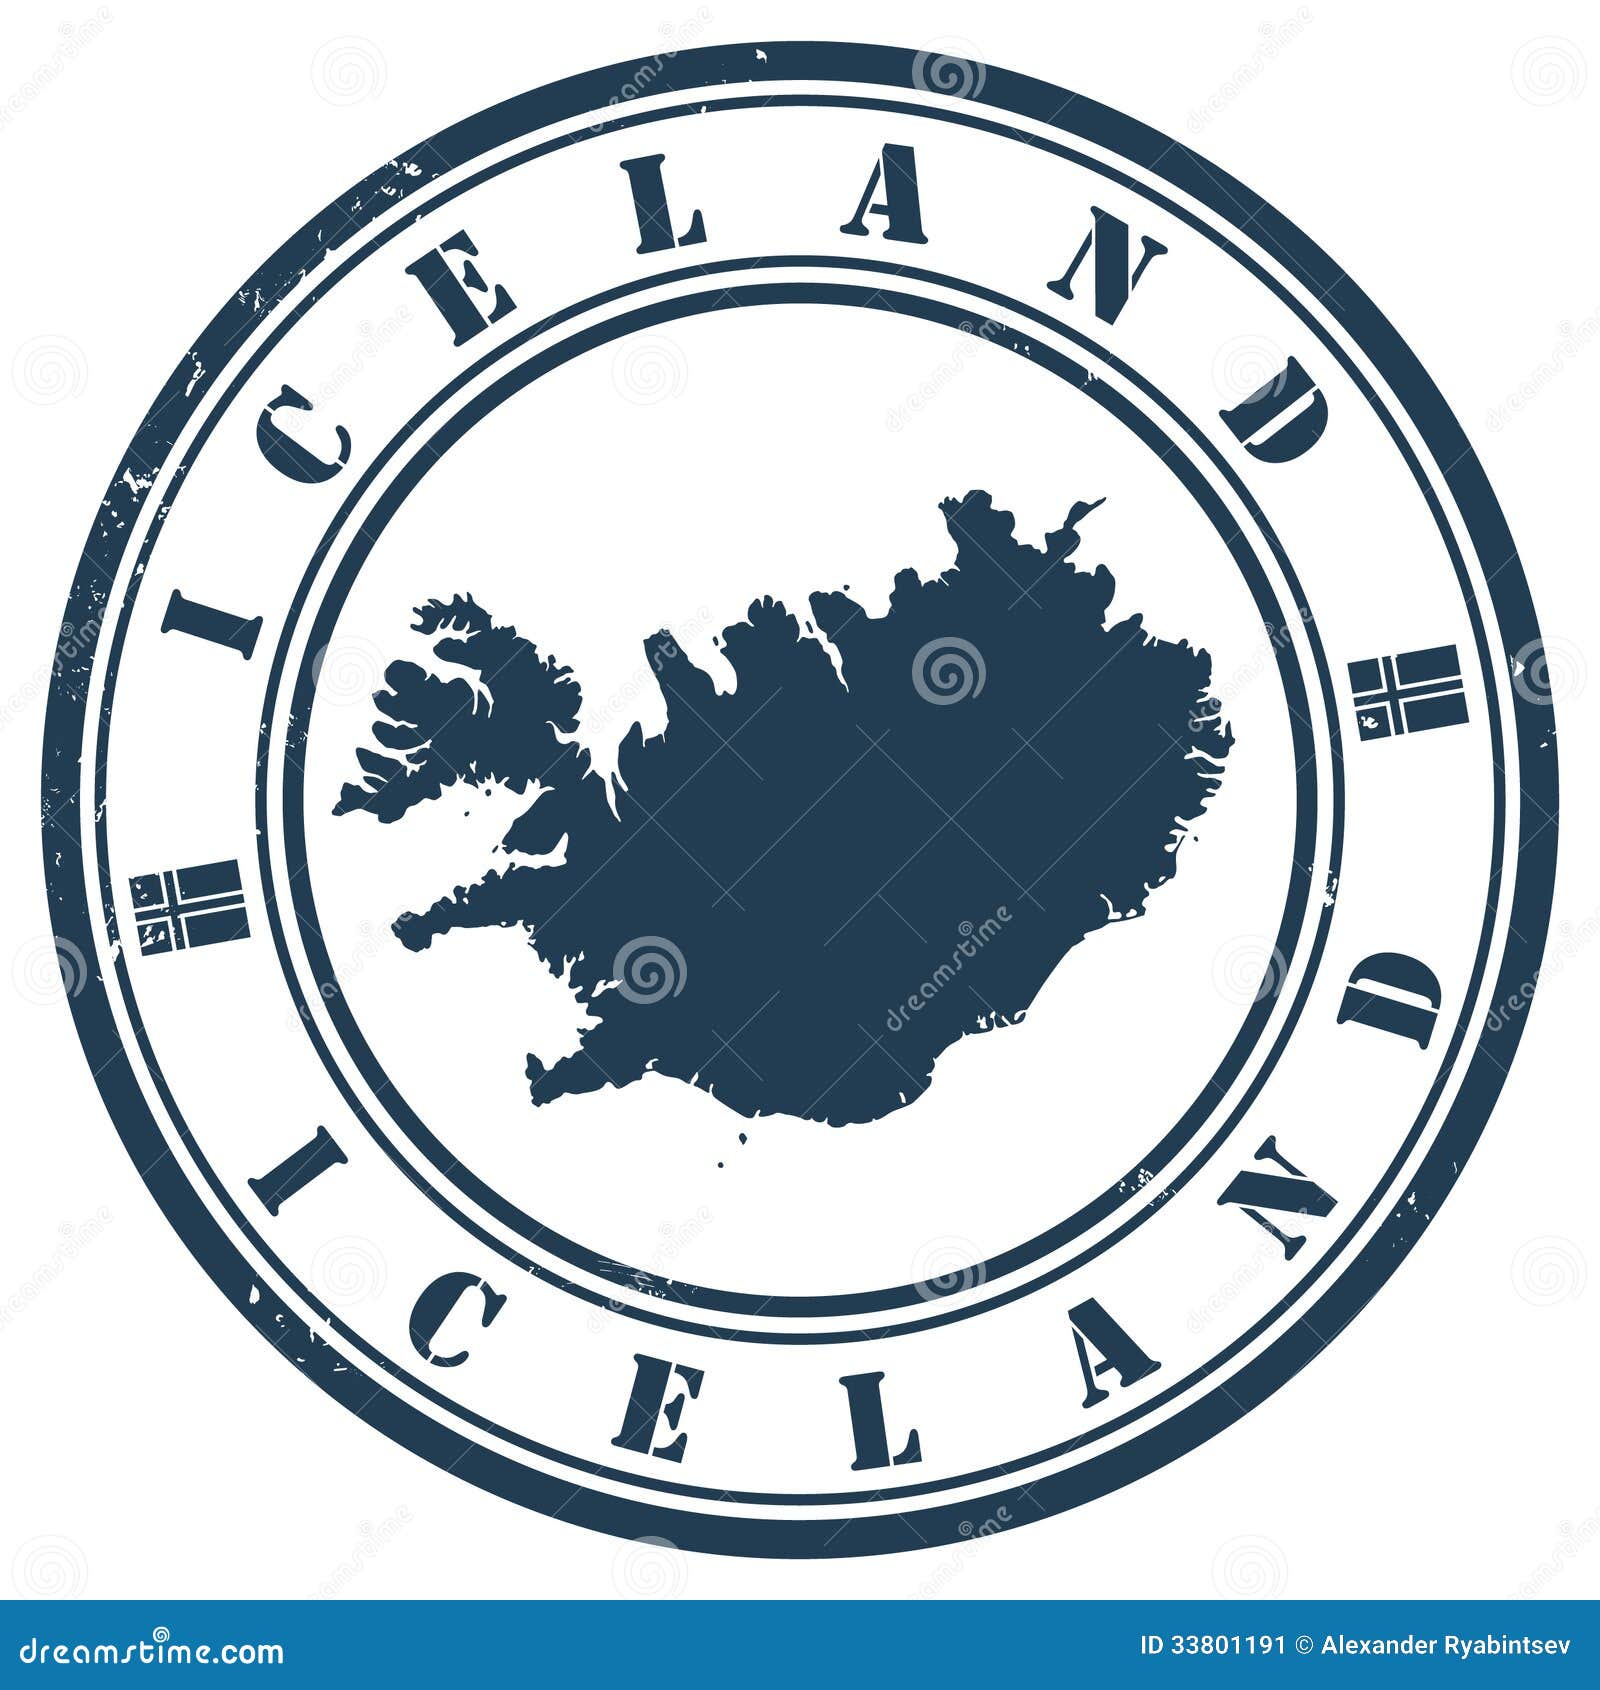 clipart iceland - photo #46